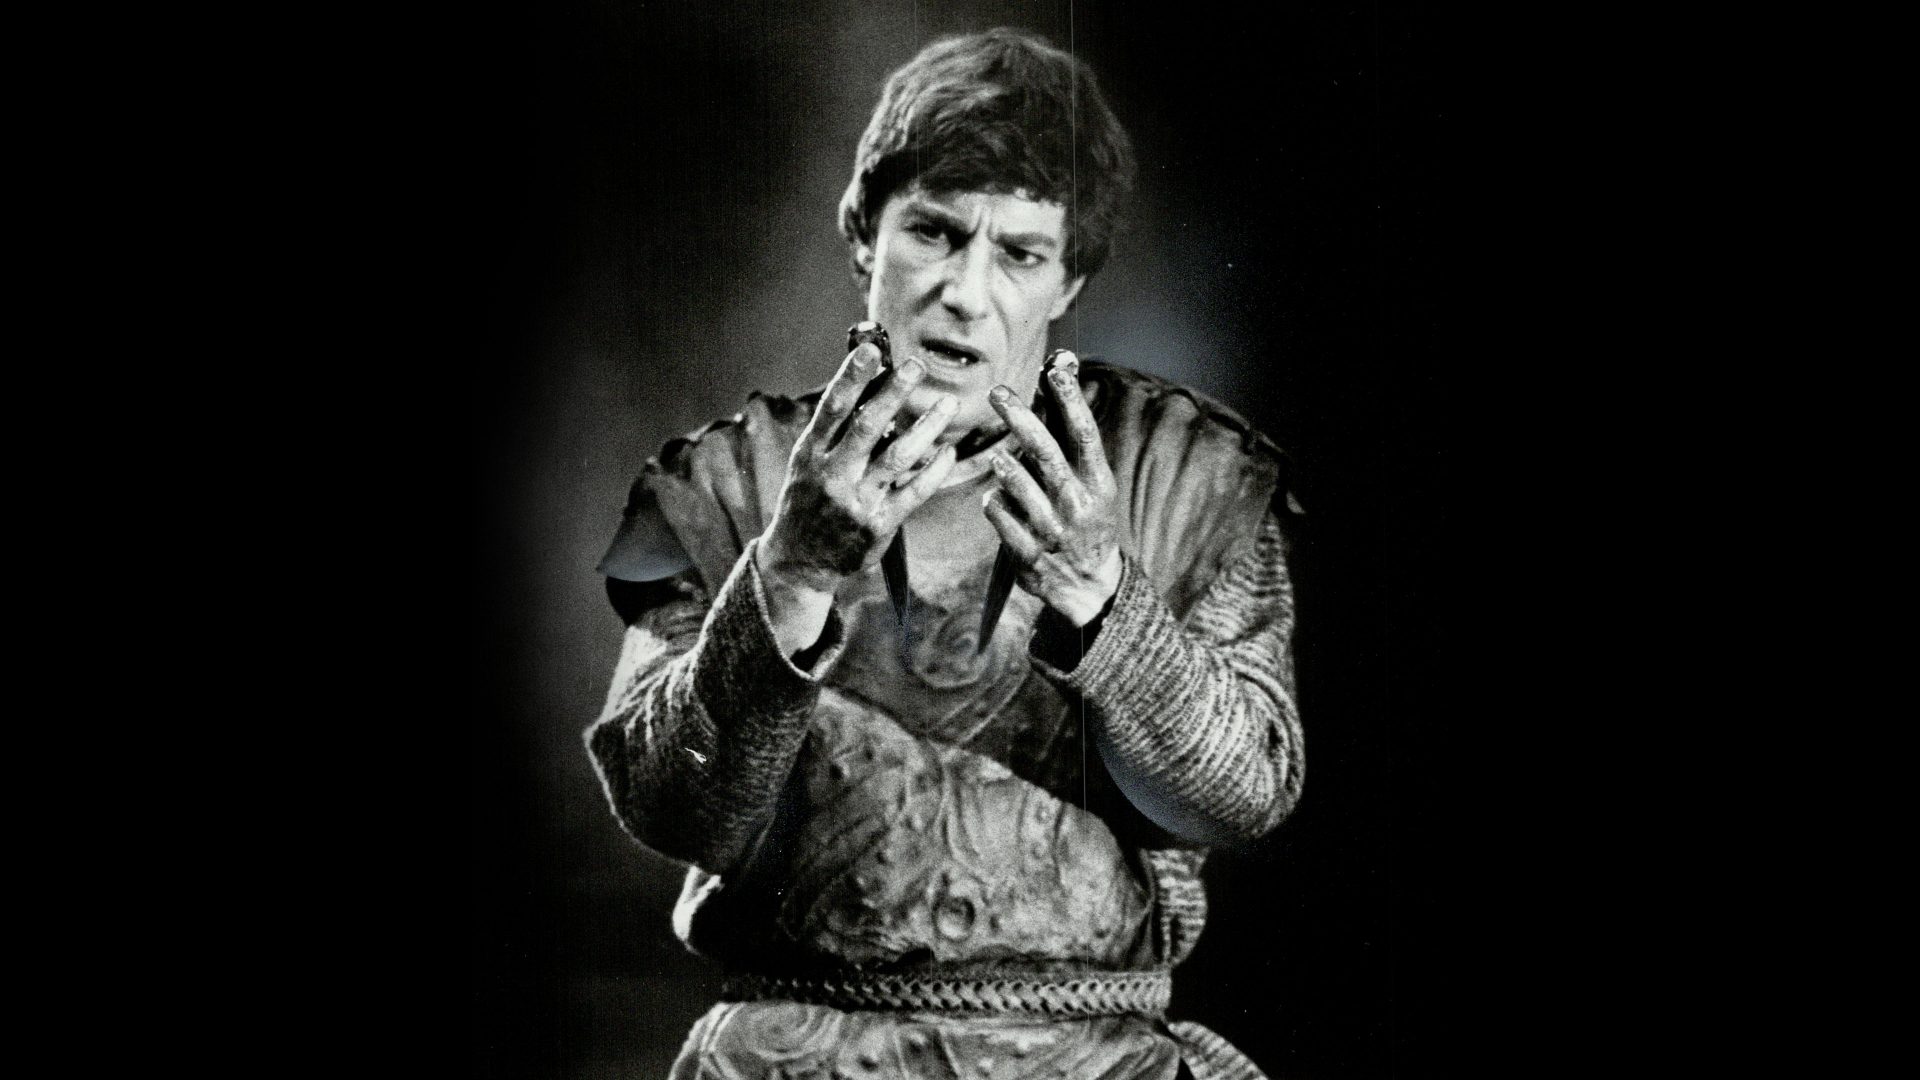 Actor Nicholas Pennell stars in a 1983 production of Macbeth. Photo: Reg Innell/Toronto Star